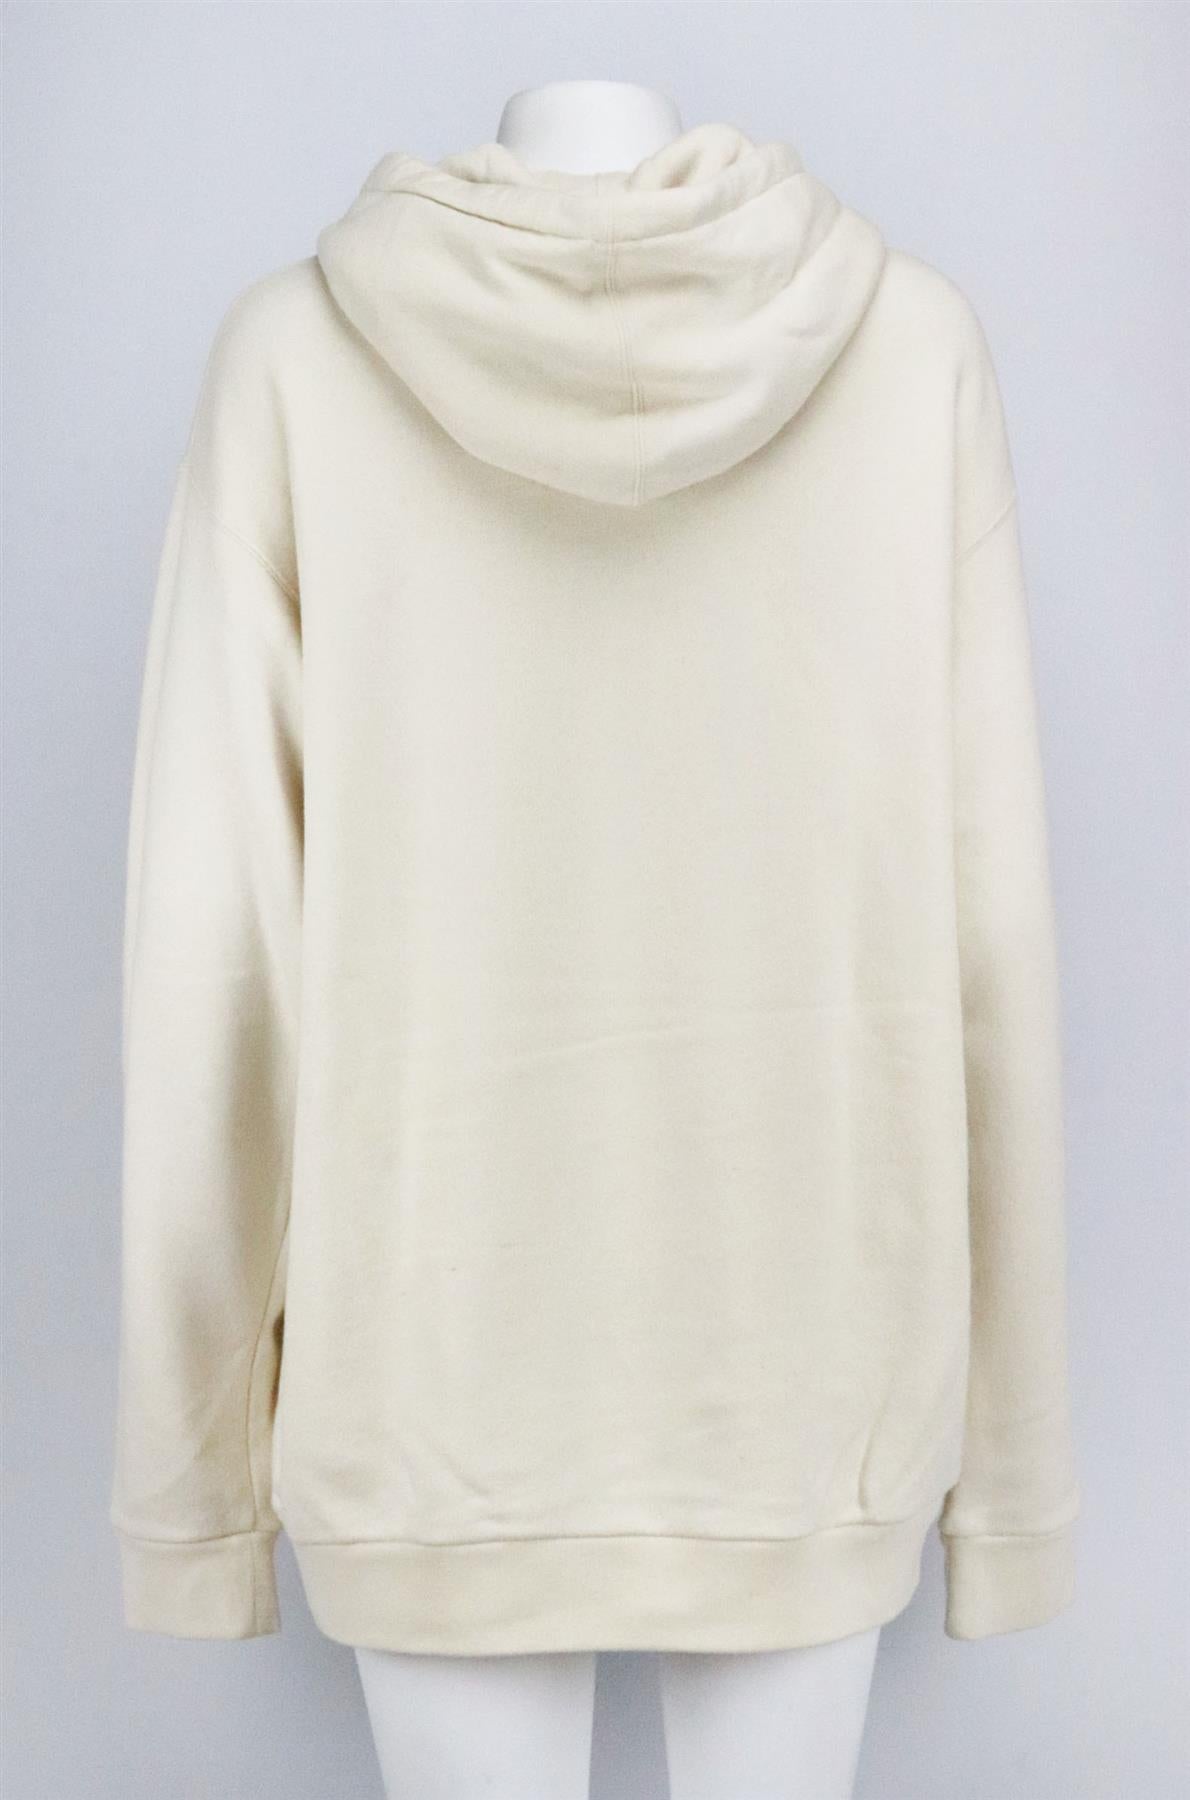 GUCCI OVERSIZED EMBELLISHED COTTON TERRY HOODIE LARGE